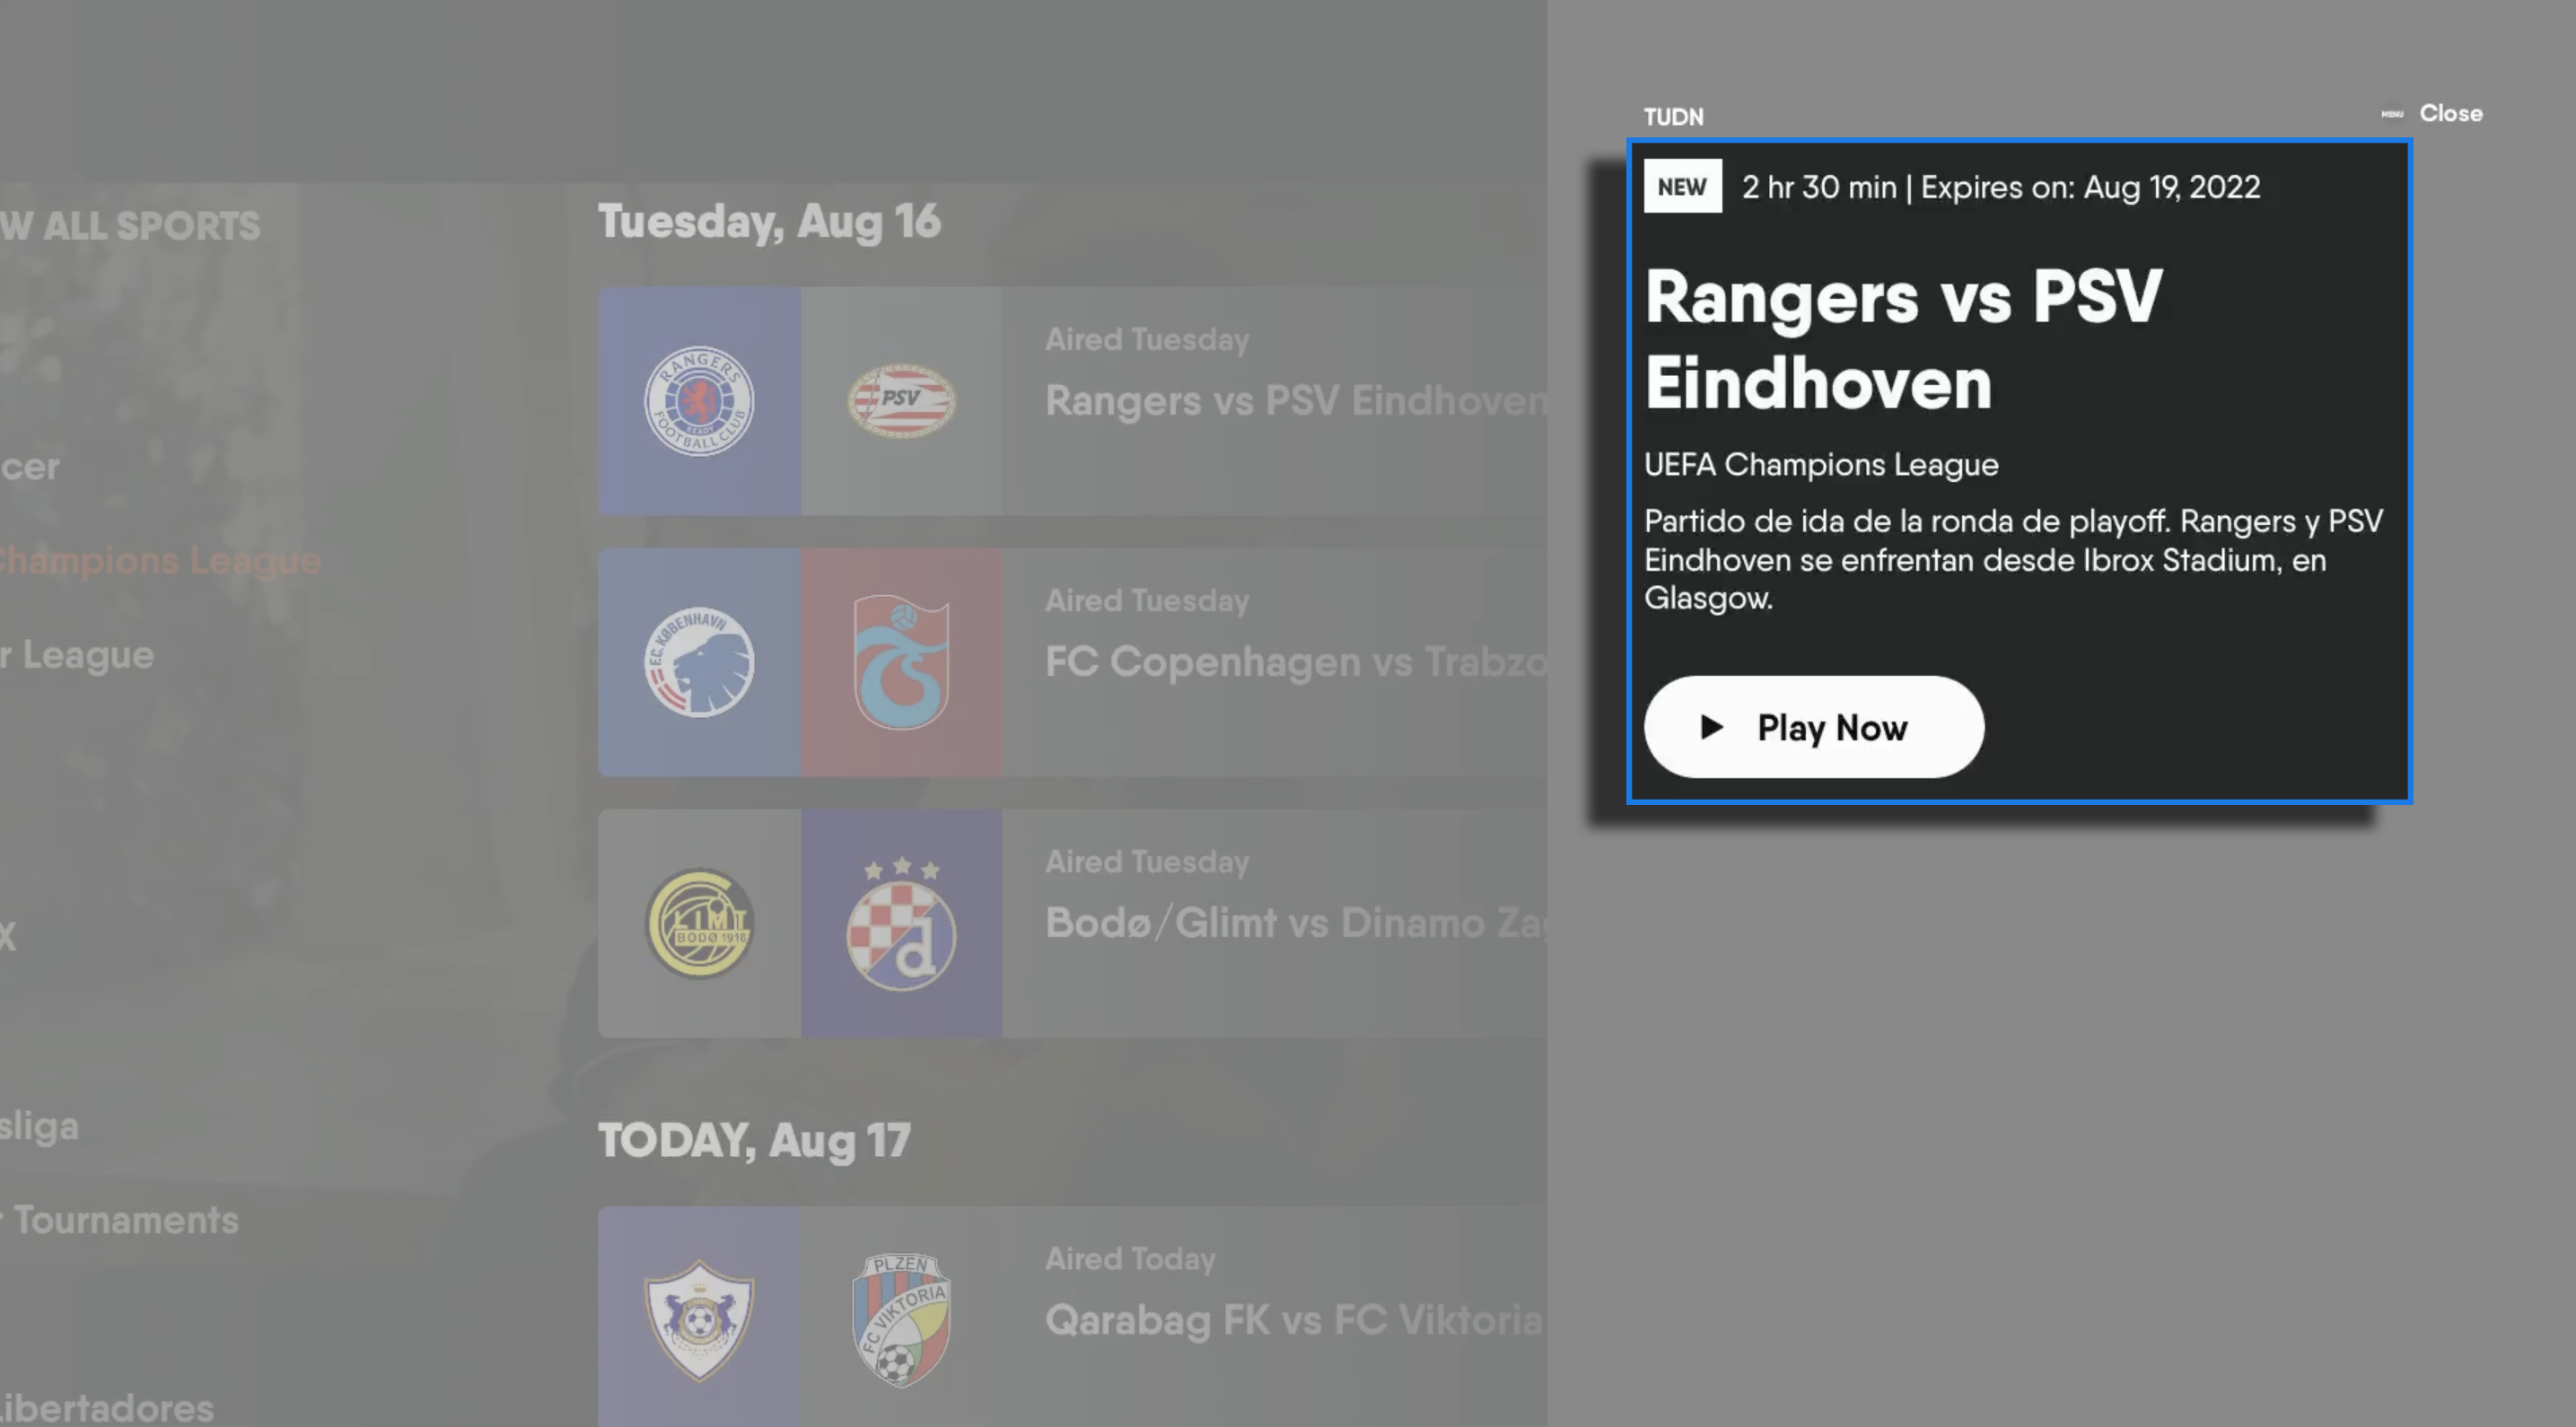 Program information screen for a previously-aired soccer match on the FuboTV app for Apple TV with PLAY NOW button